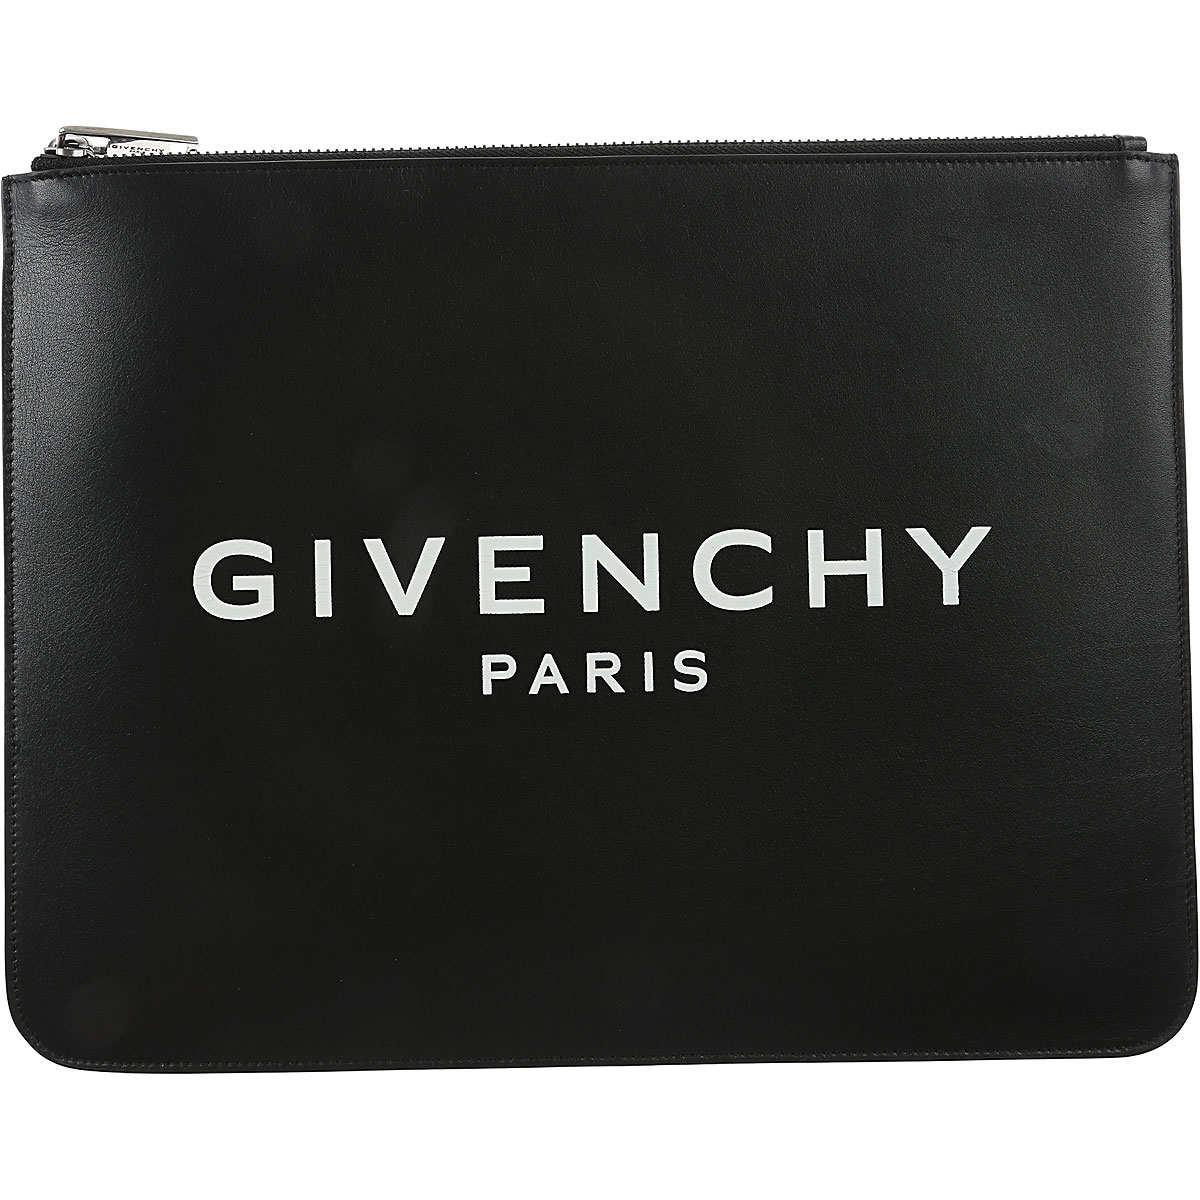 Briefcases Givenchy, Style code: bk600jk0ac-001-